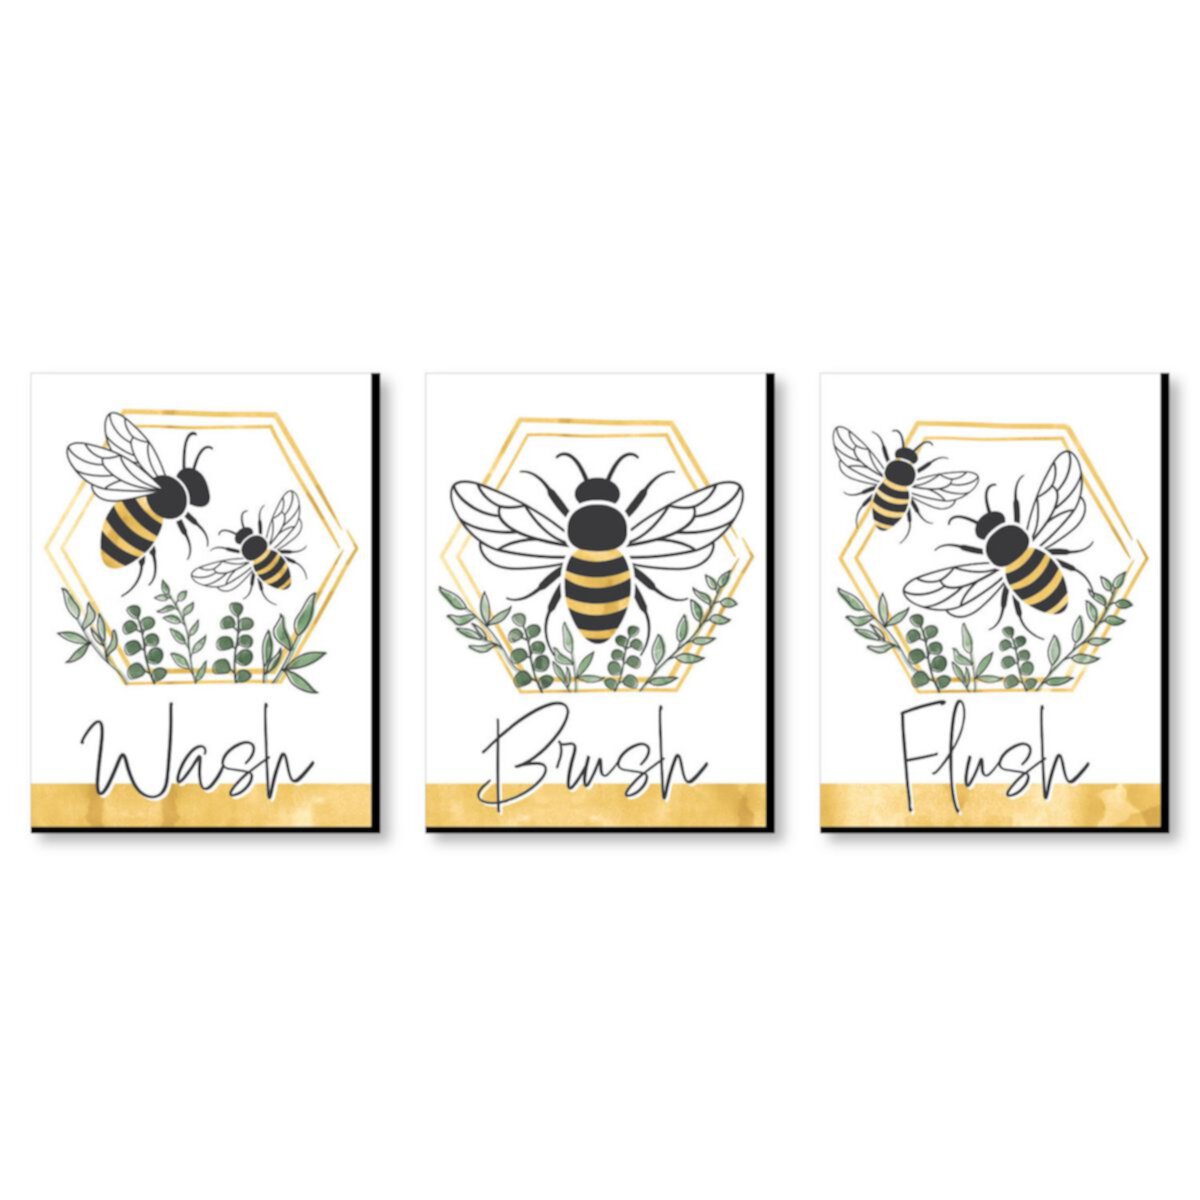 Big Dot of Happiness Little Bumblebee - Bee Kids Bathroom Rules Wall Art - 7.5 x 10 inches - Set of 3 Signs - Wash, Brush, Flush Big Dot of Happiness